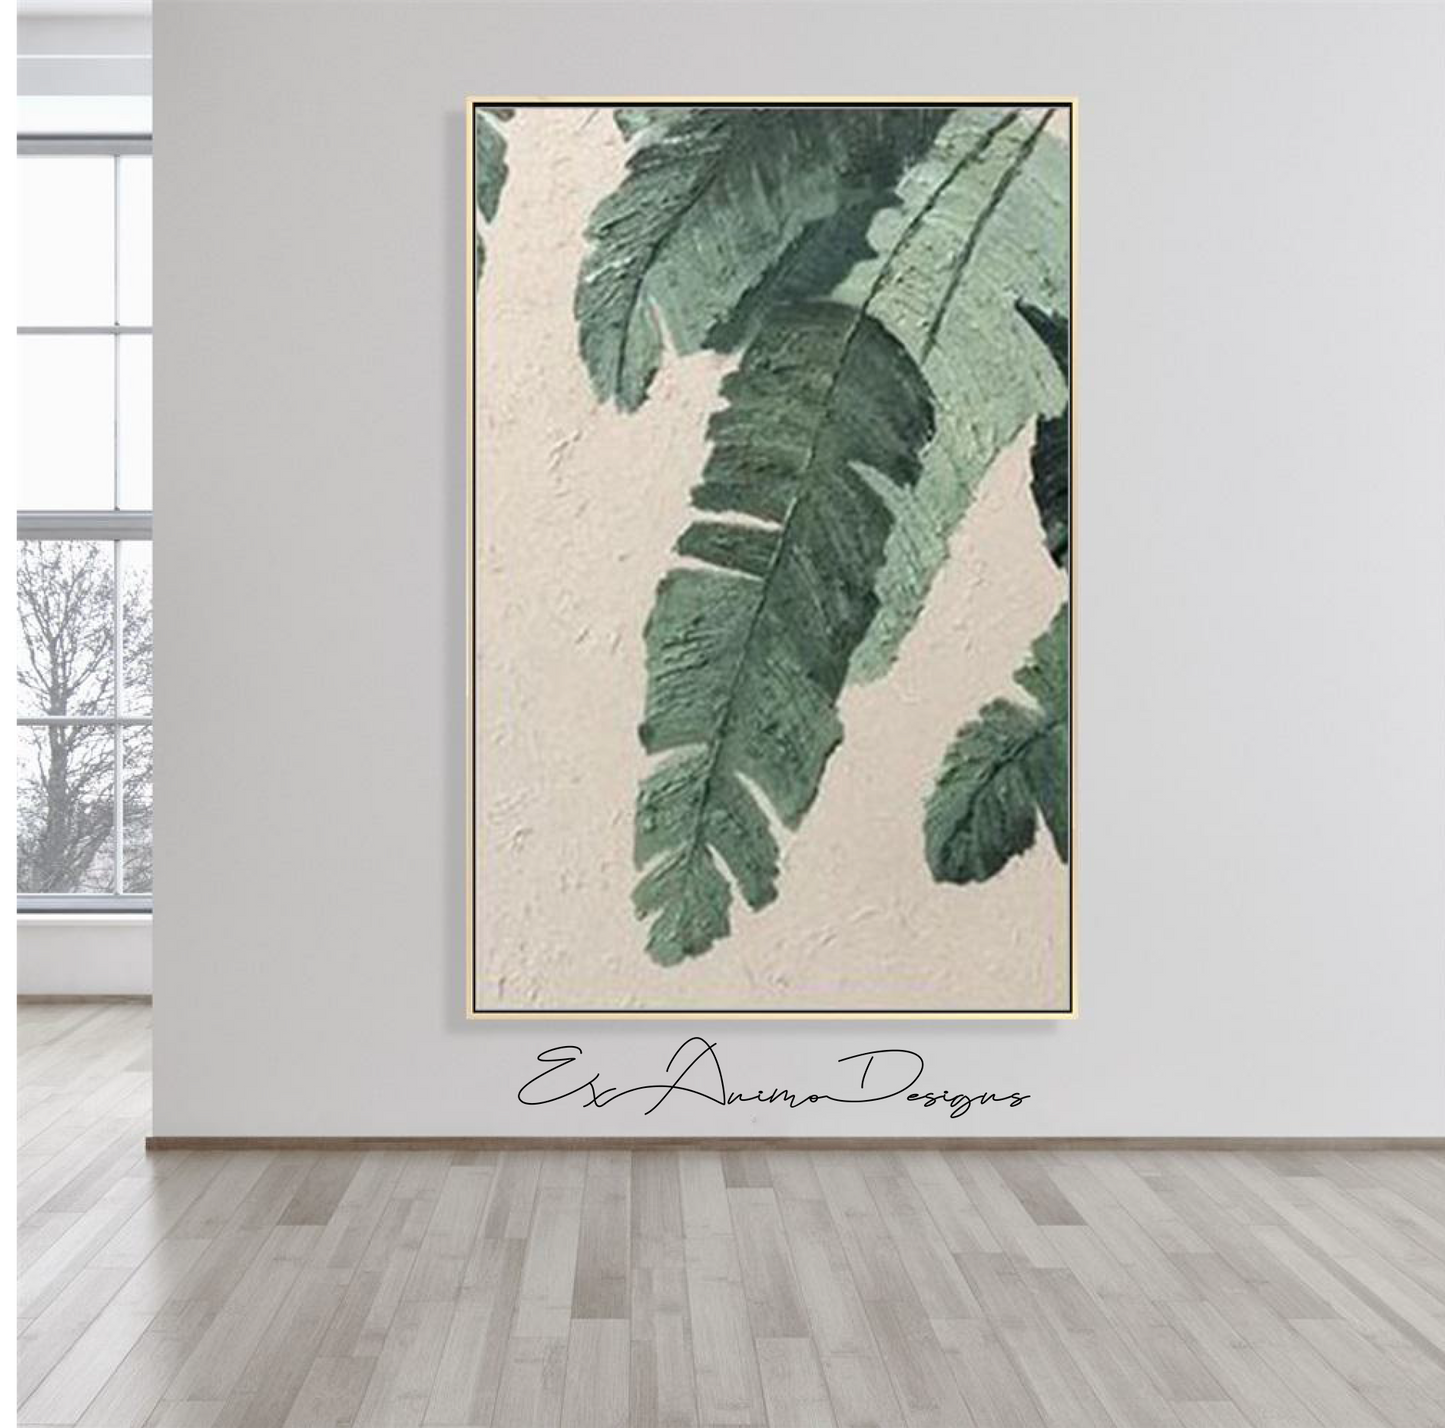 Ex Animo Designs -  Tropical Banana Leaves Landscape Textured Abstract Oil Painting